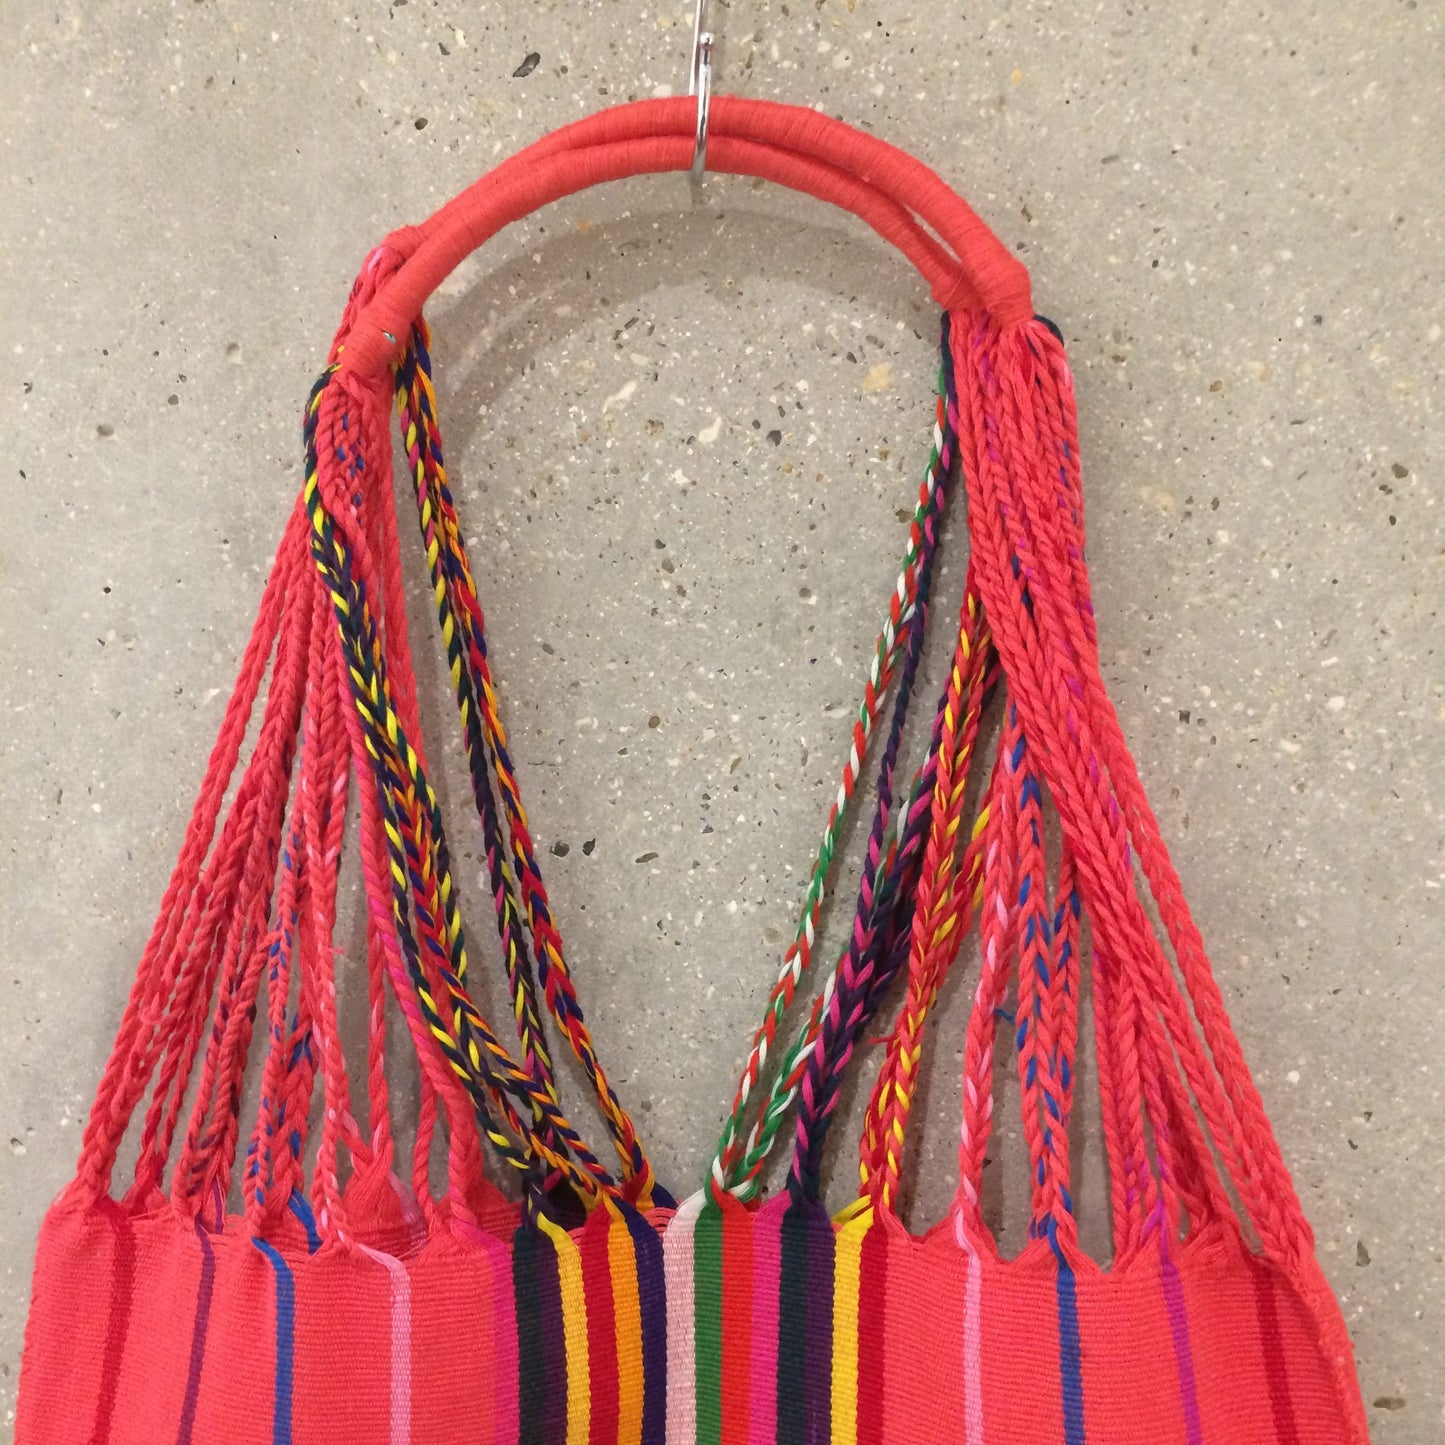 Mexican Handwoven, colourful bag from Chiapas - Pink